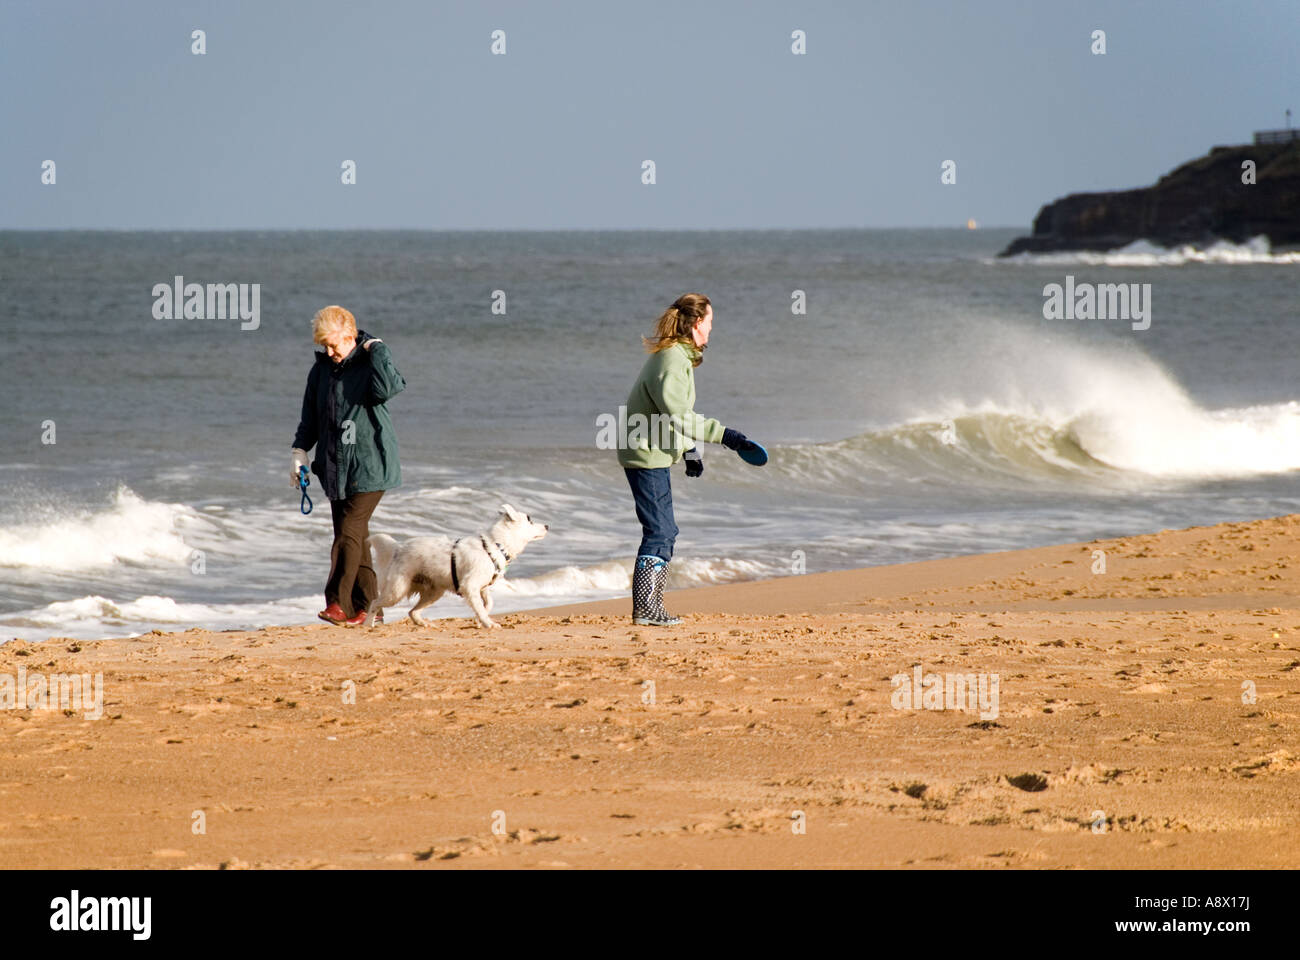 Two women walking a dog on the beach as waves break and a strong wind carries away the spray. Stock Photo